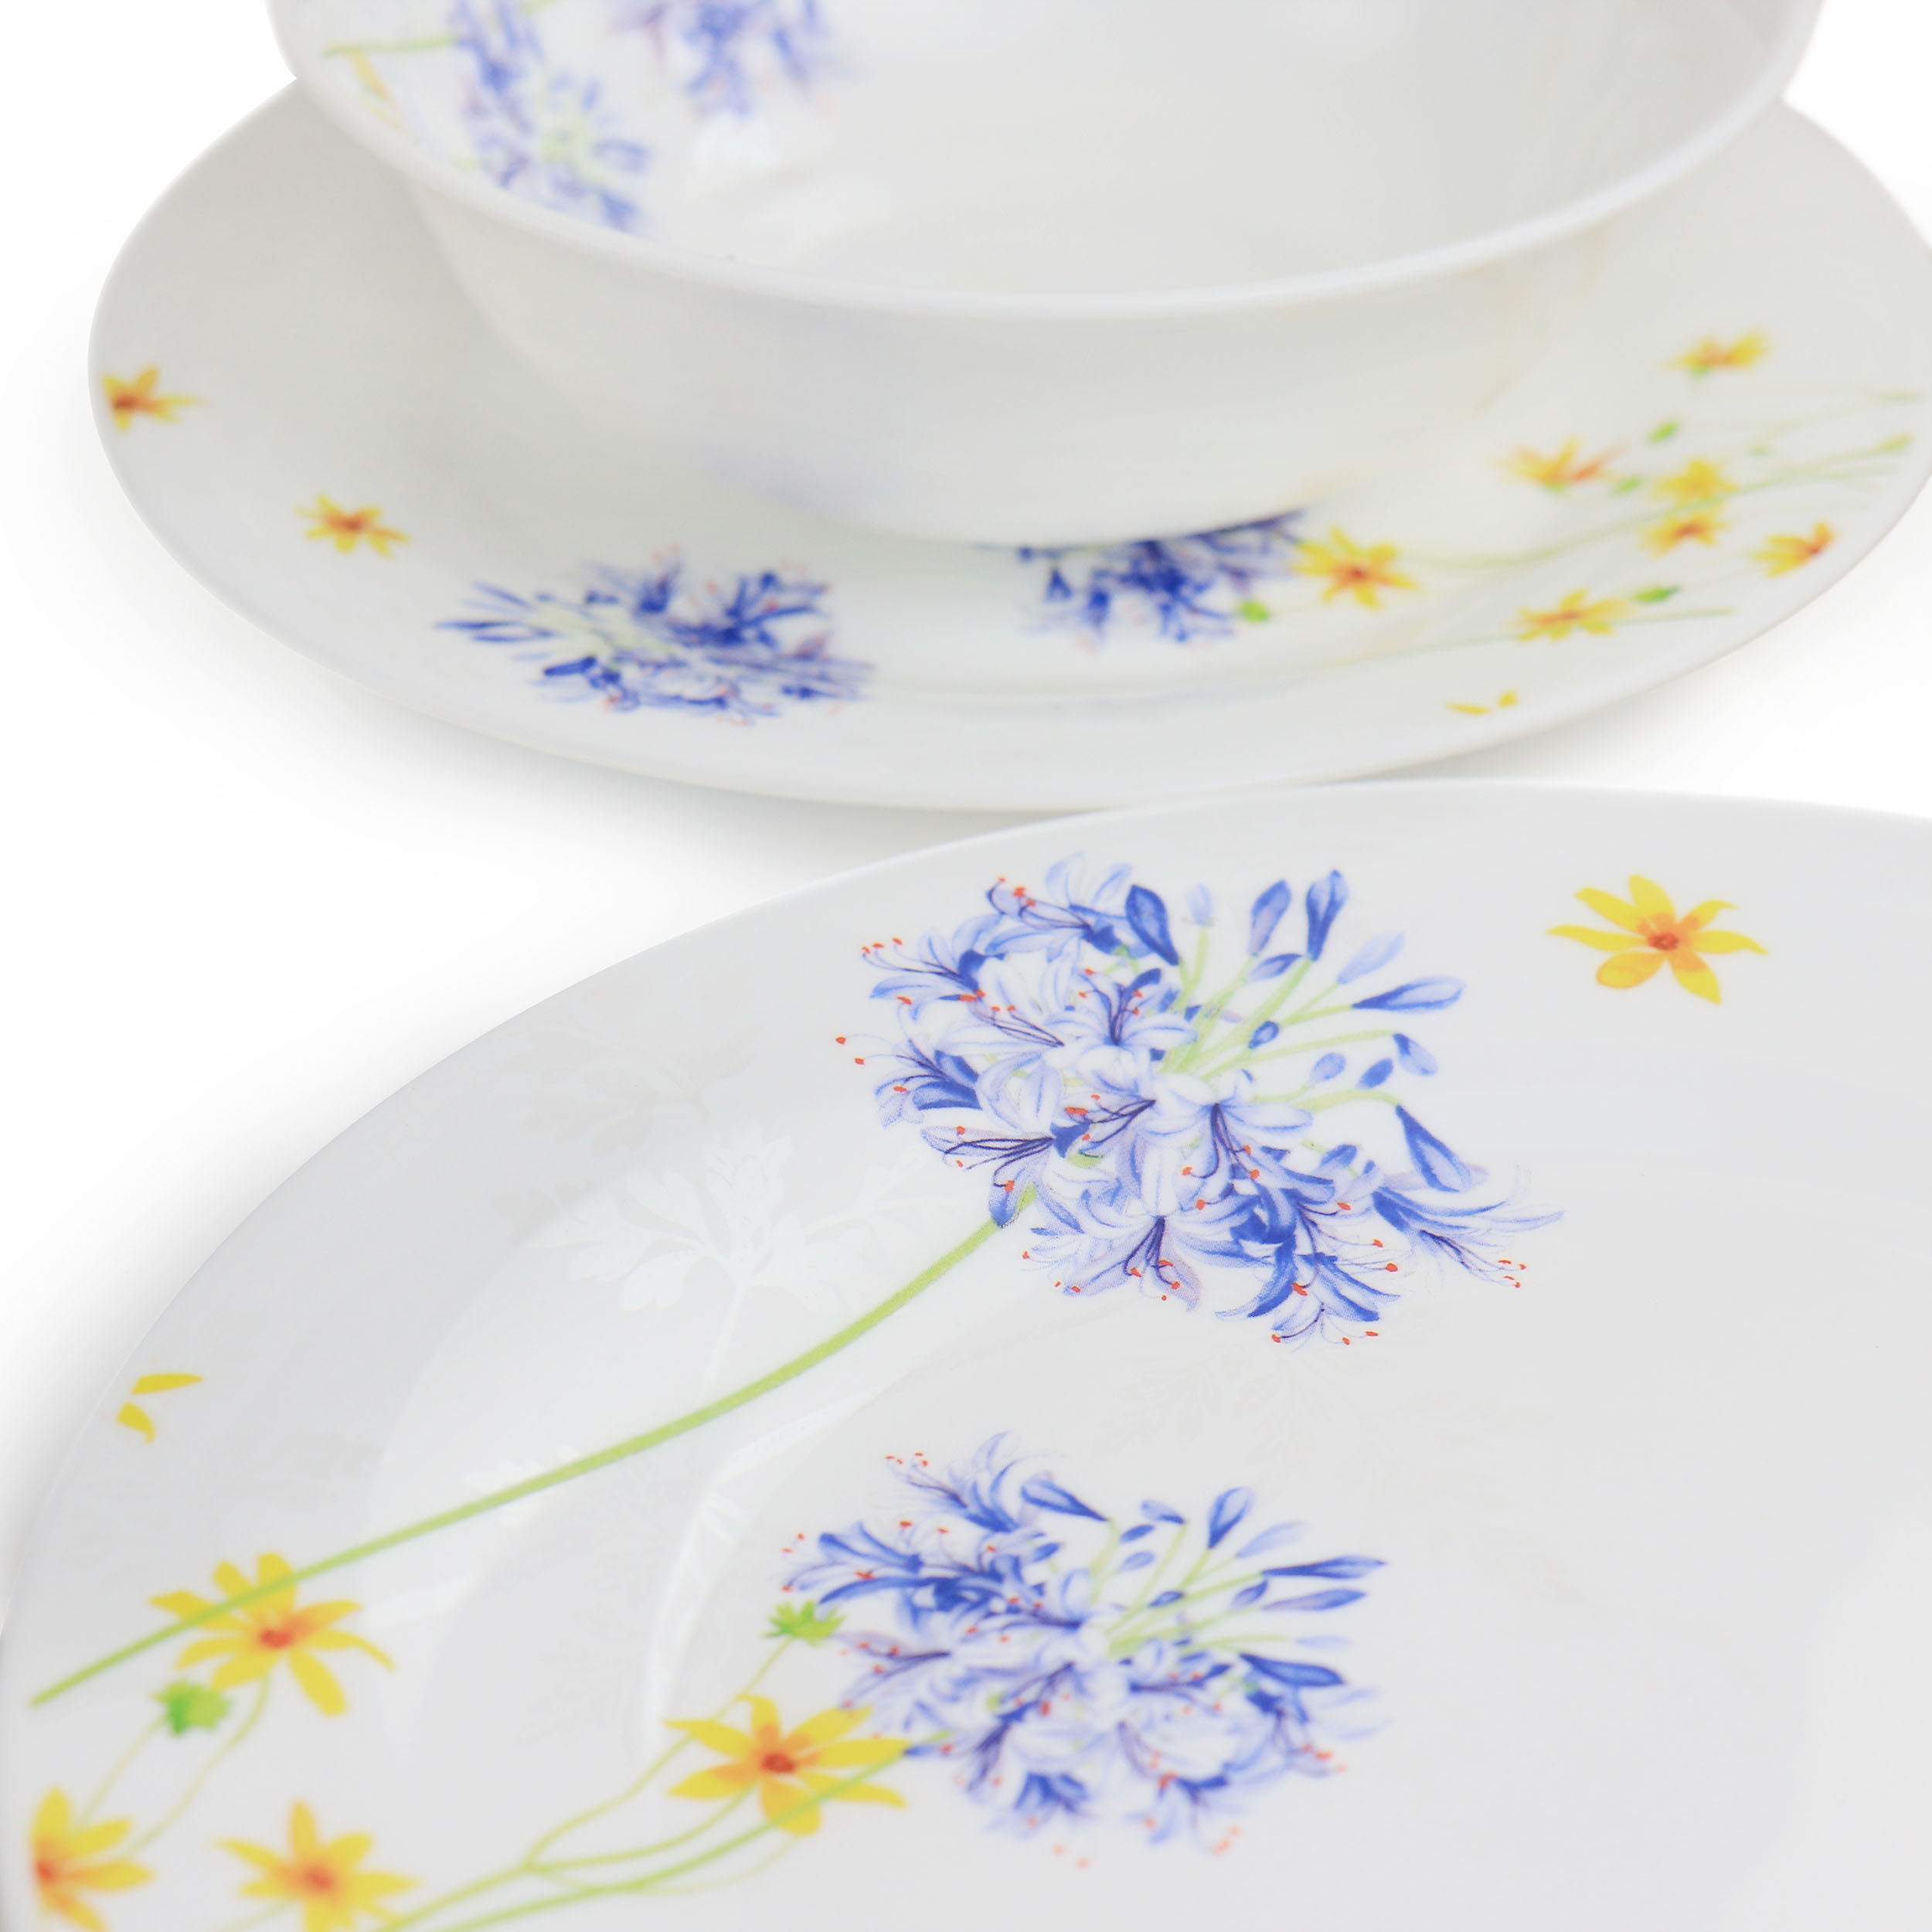 Gibson Ultra Violet Floral 12 Piece Tempered Opal Glass Dinnerware Set